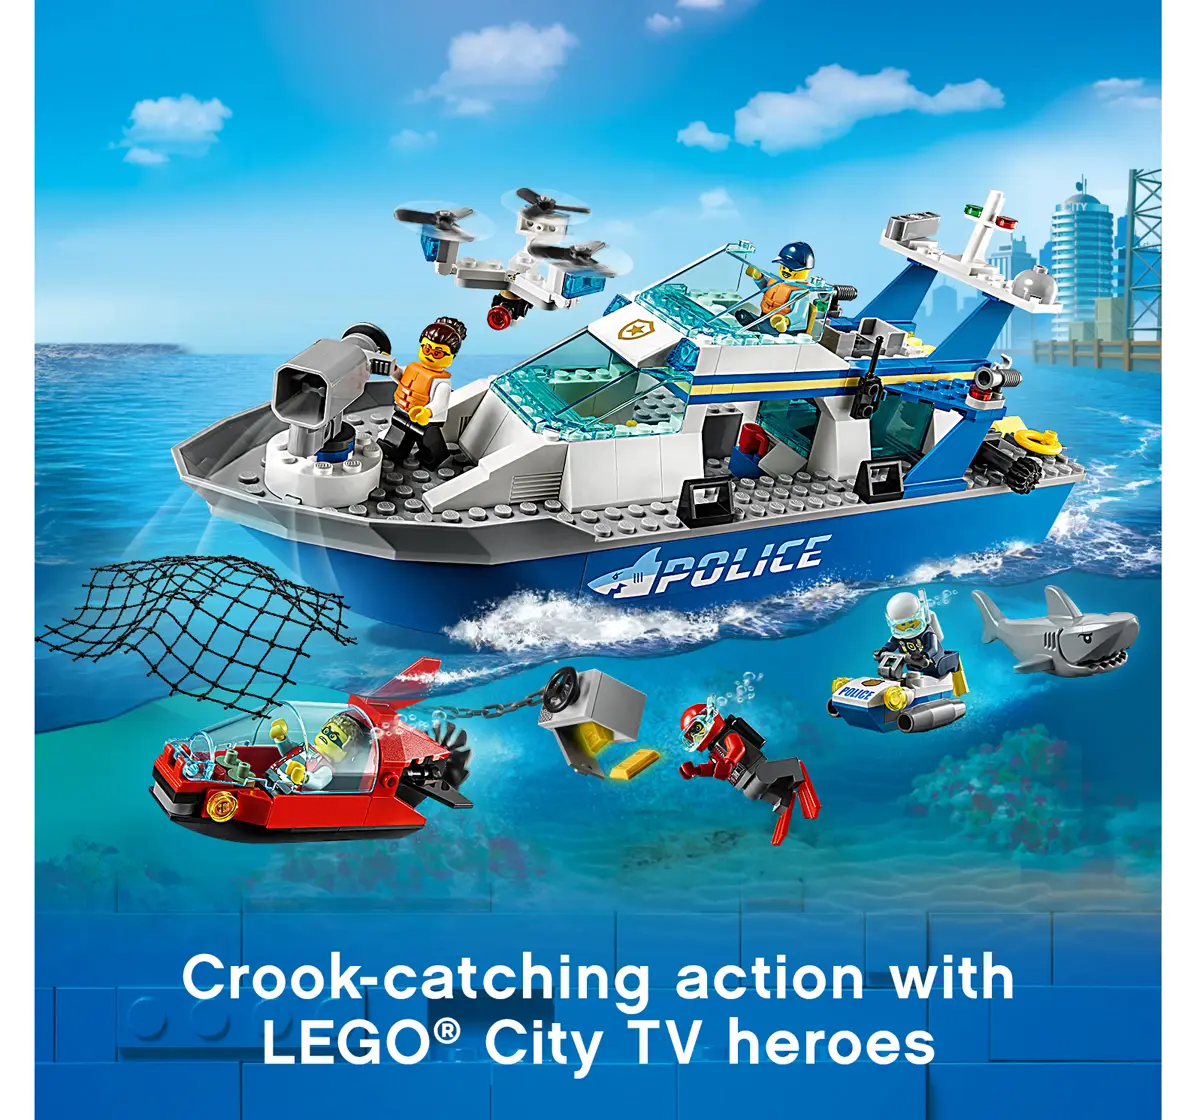 Lego City Police Patrol Boat 60277 Building Kit  Cool Police Toy for Kids, New 2021 (276 Pieces)